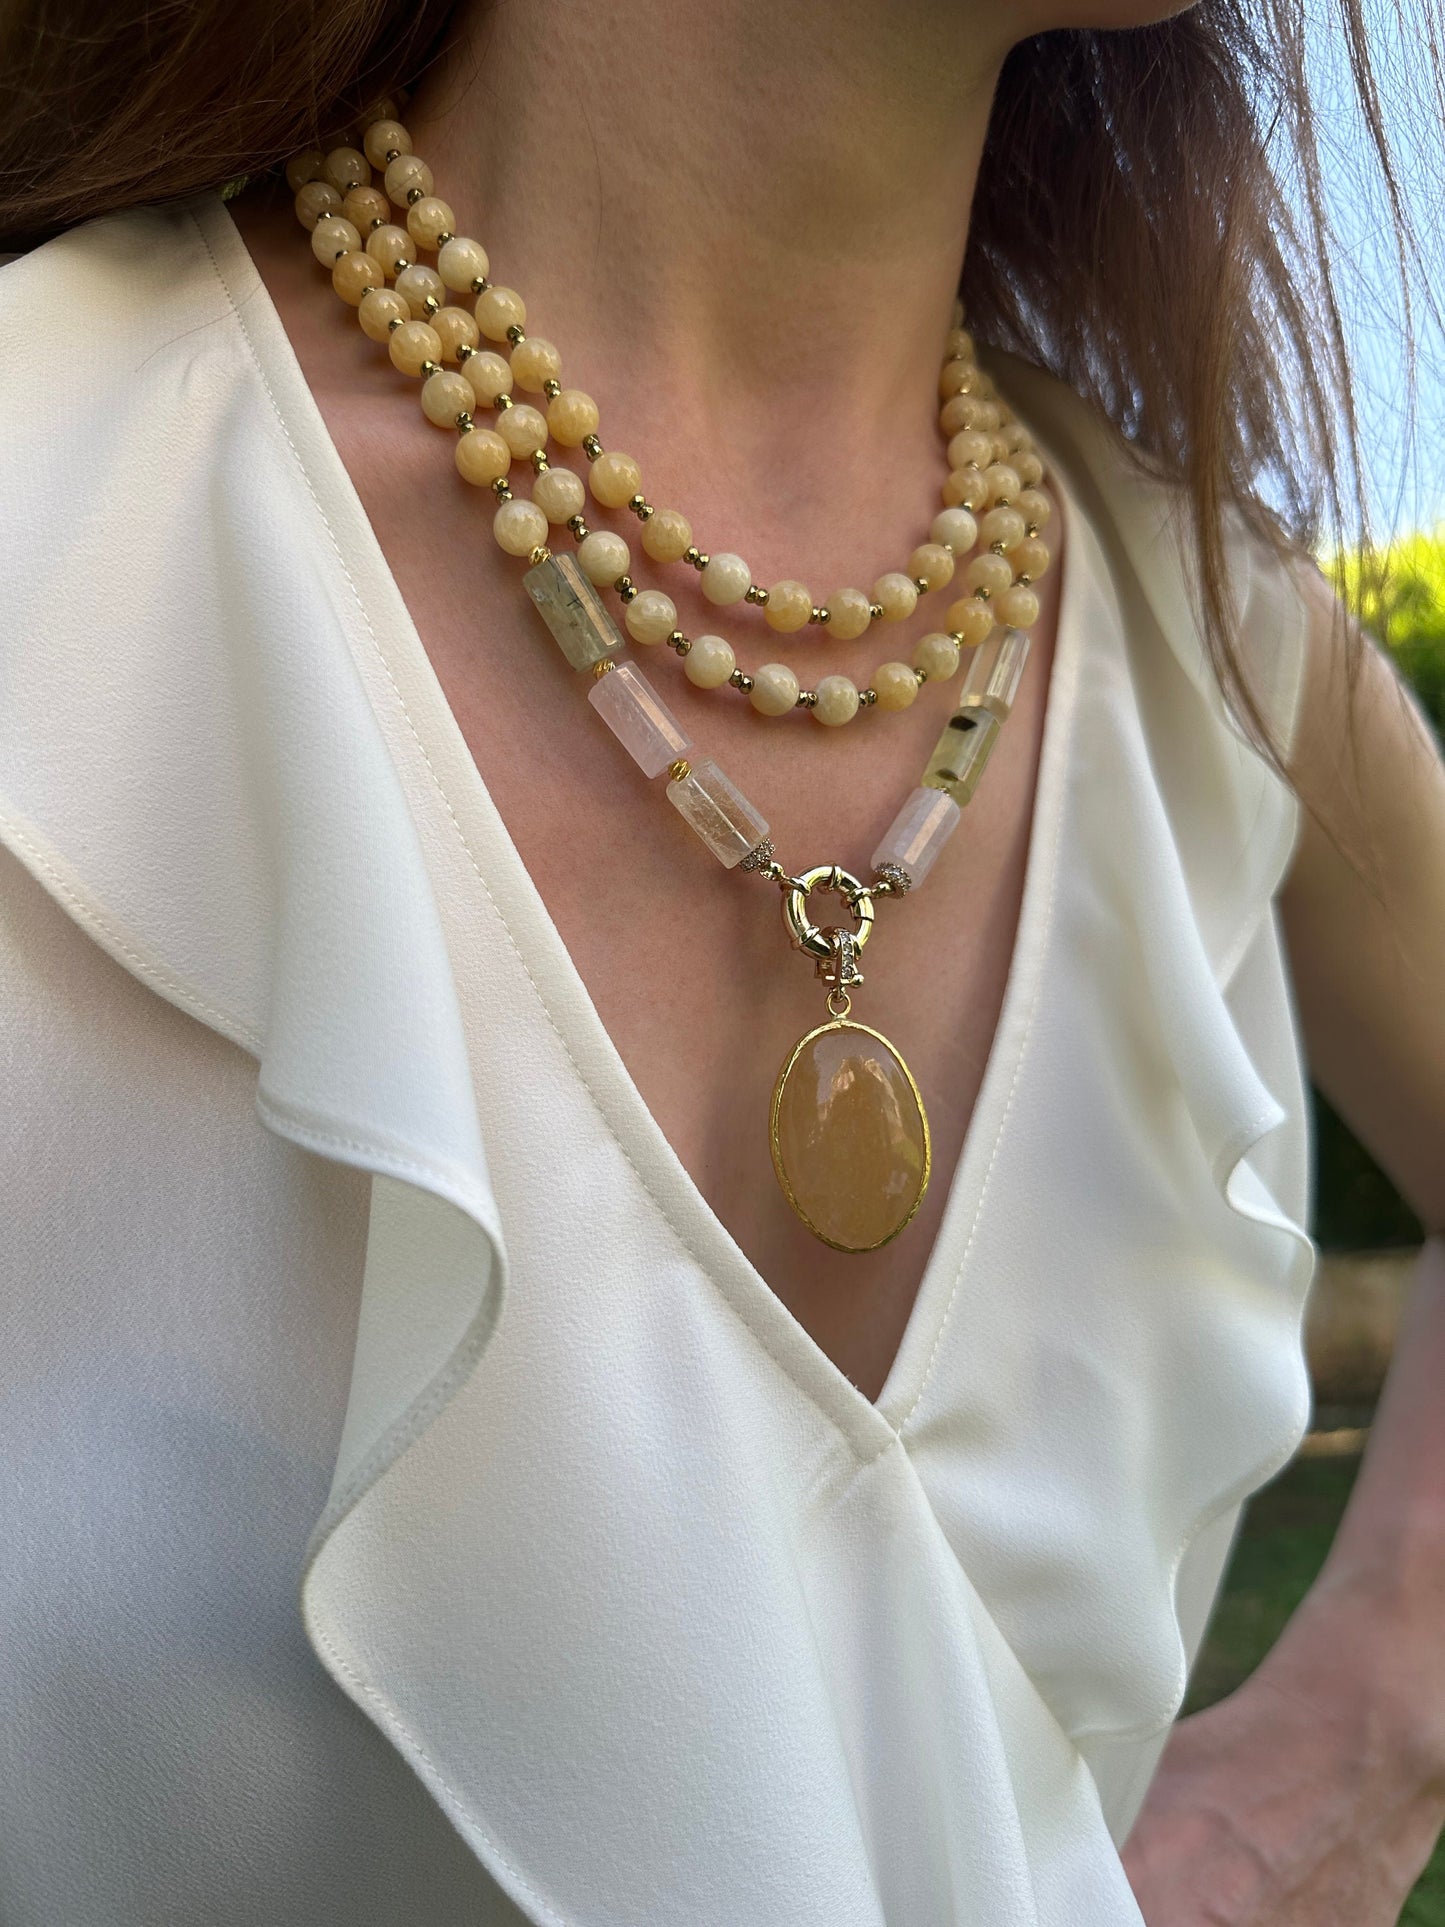 Calcite Necklace, Yellow Summer Jewelry, Multistrand Statement Necklace, Mix Stone Long Chain Necklace, Handmade Gemstone Necklace for Women